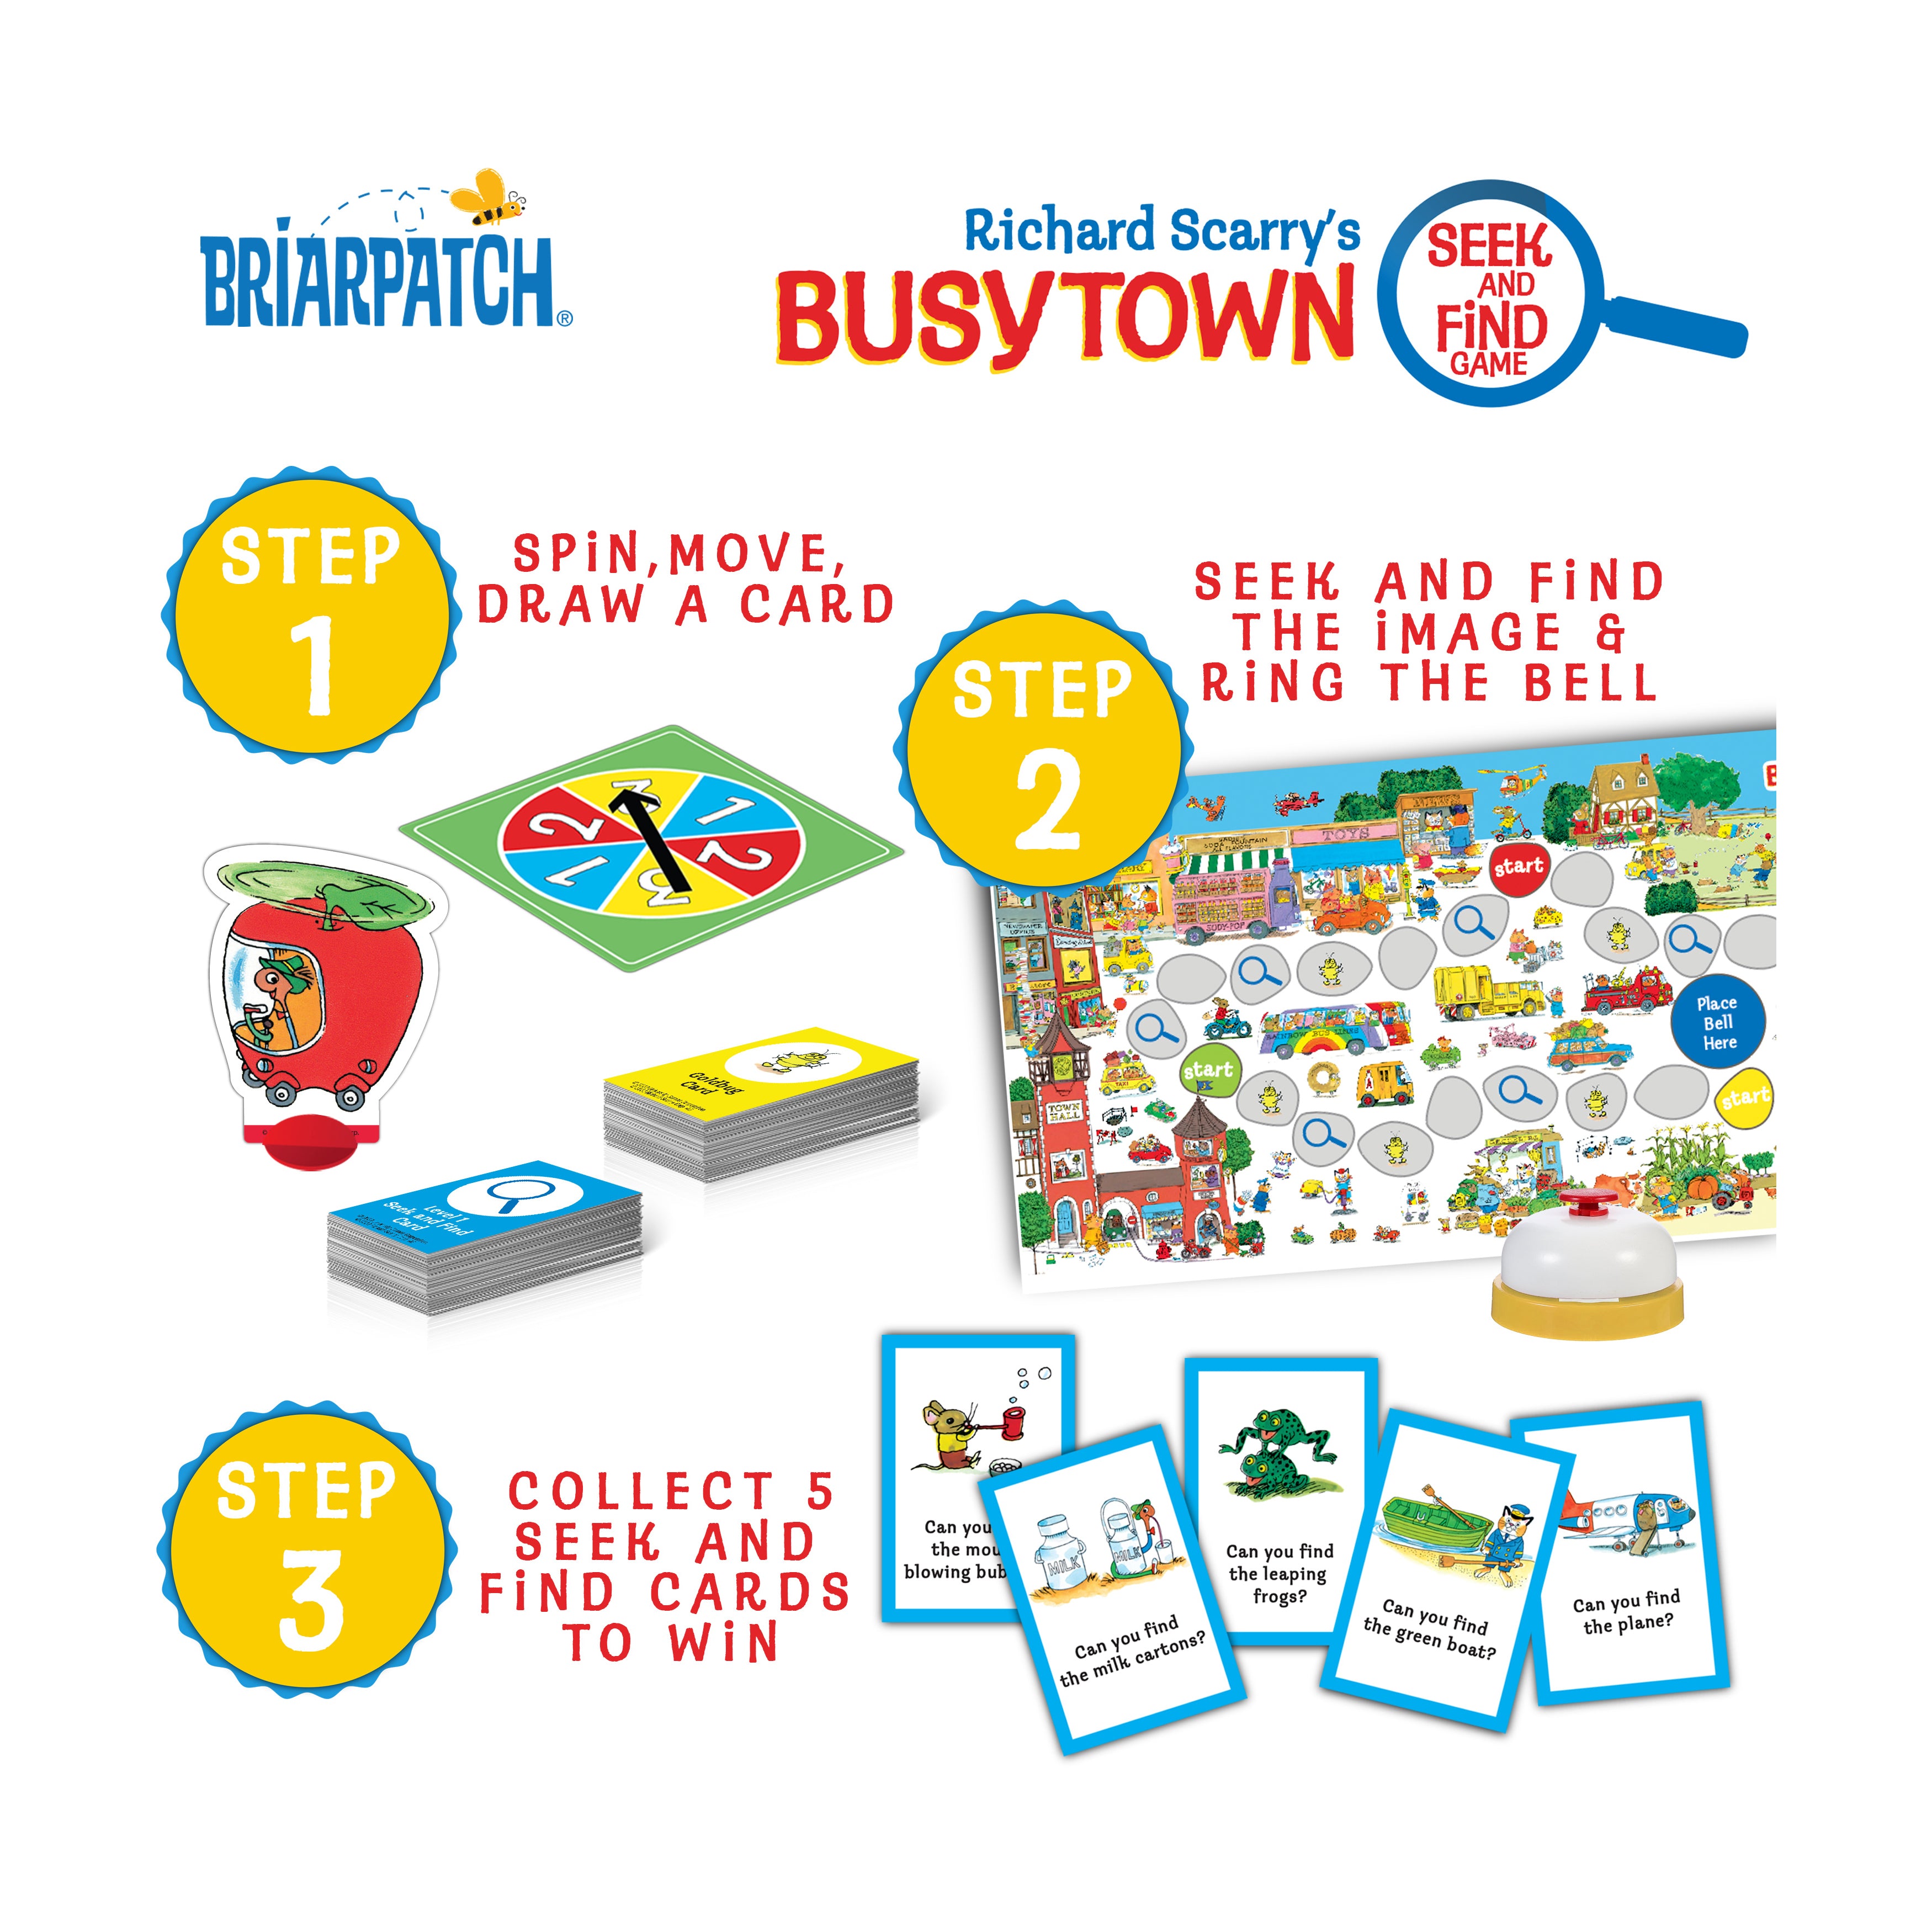 Richard Scarry's Busytown - Seek and Find Game | AreYouGame